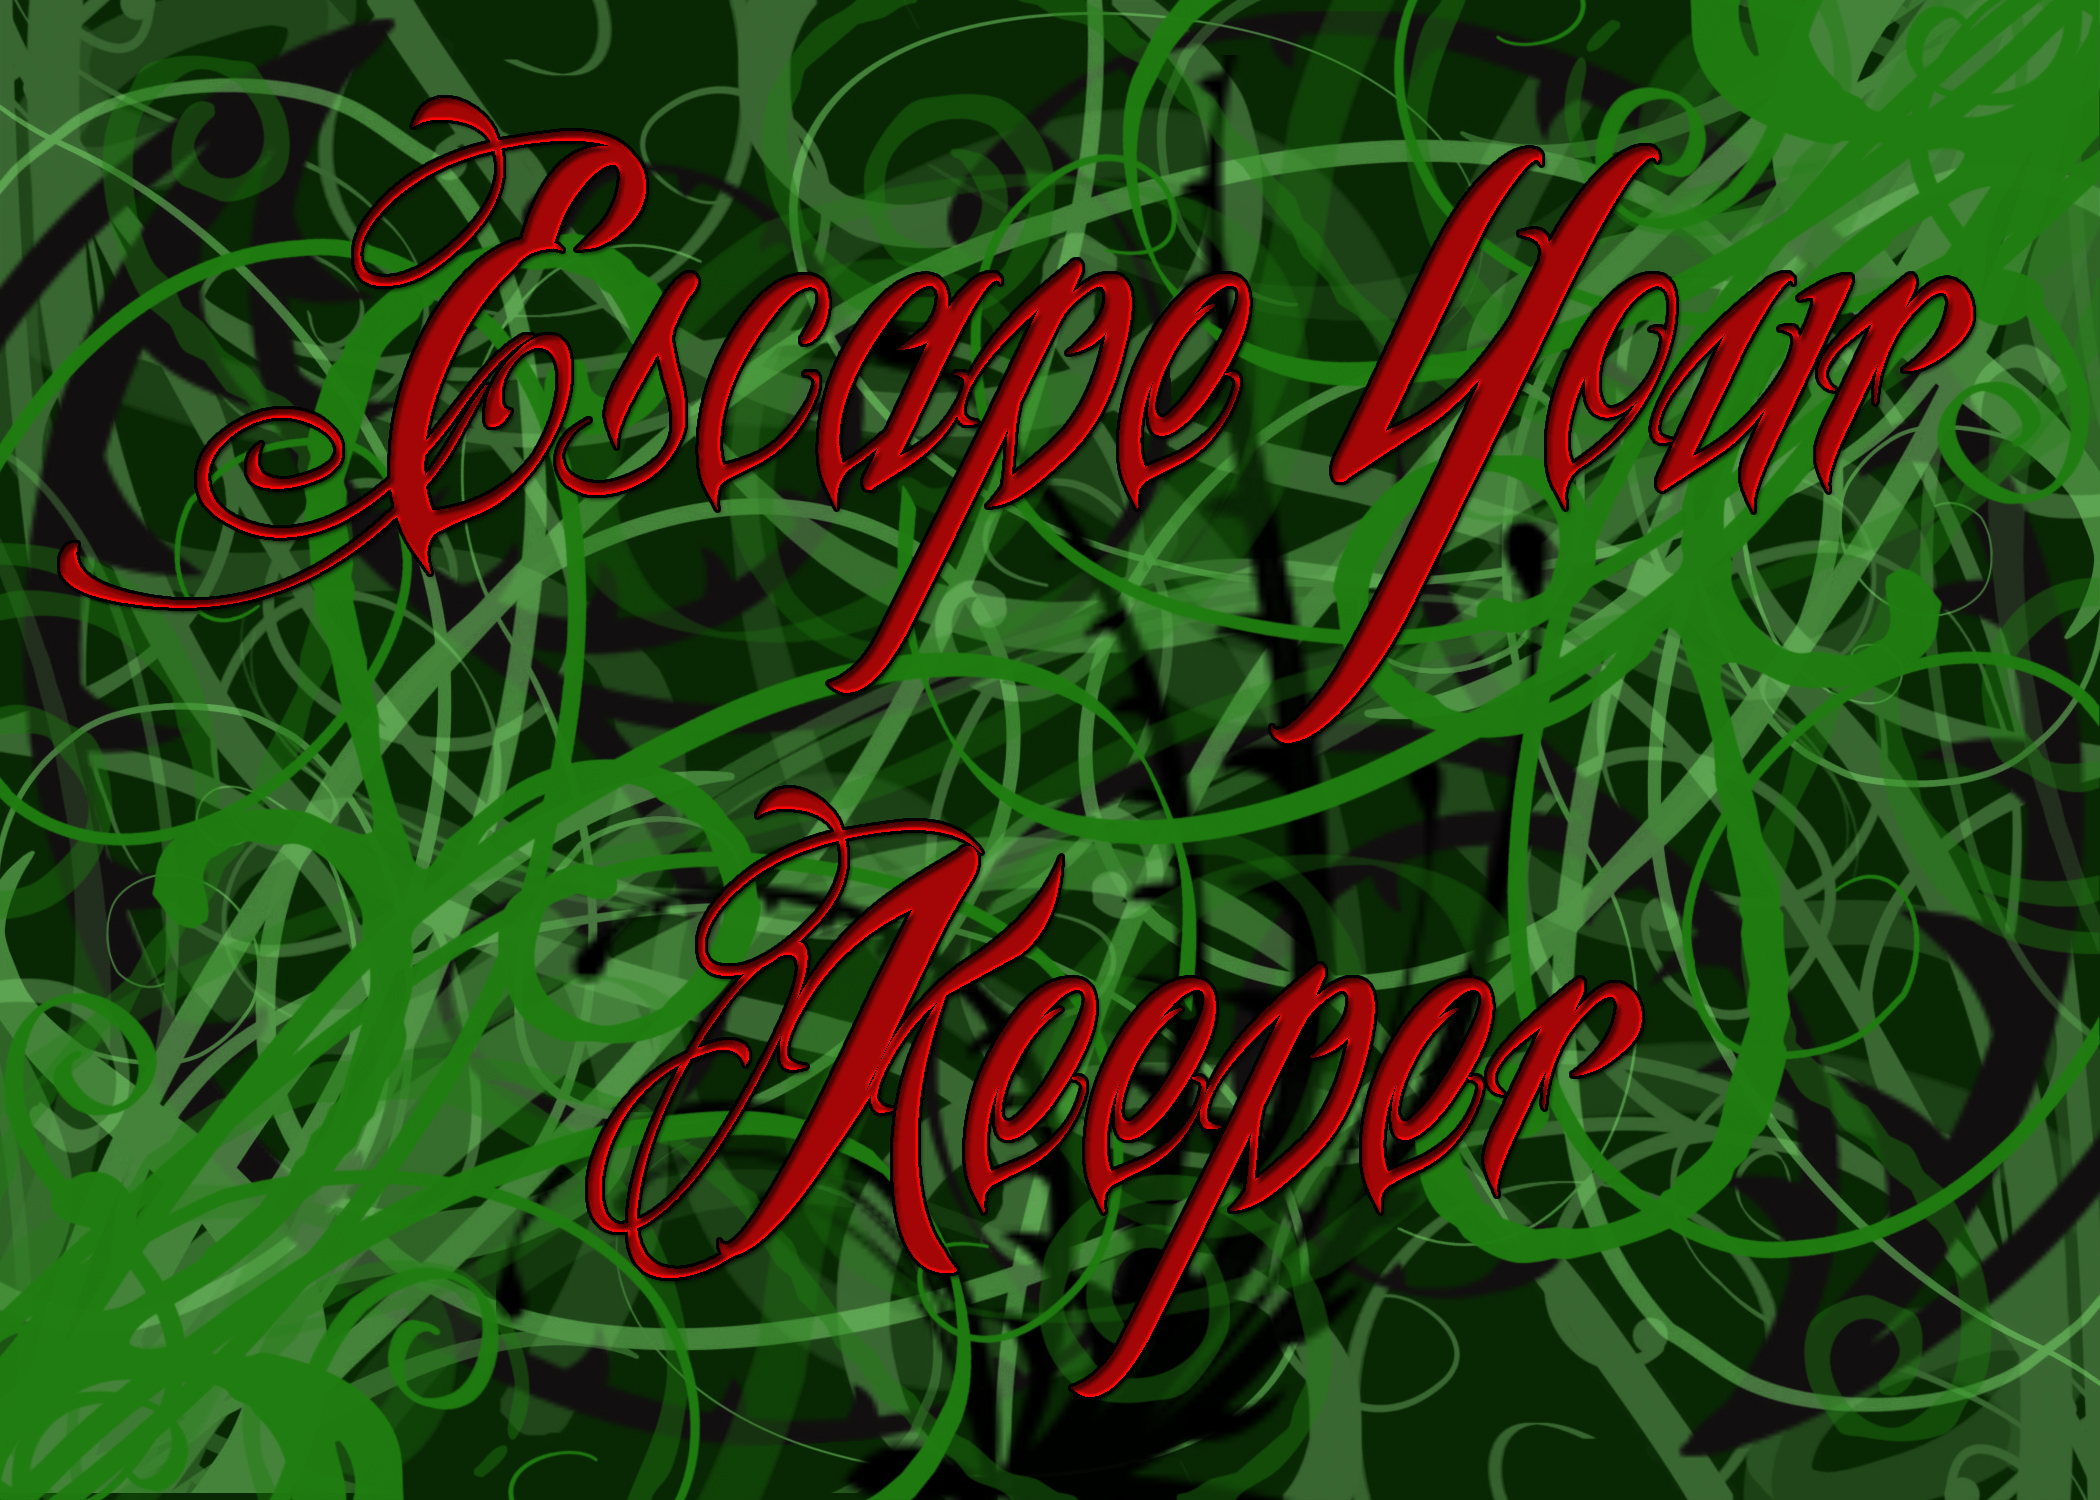 Escape Your Keeper - An Adventure Game